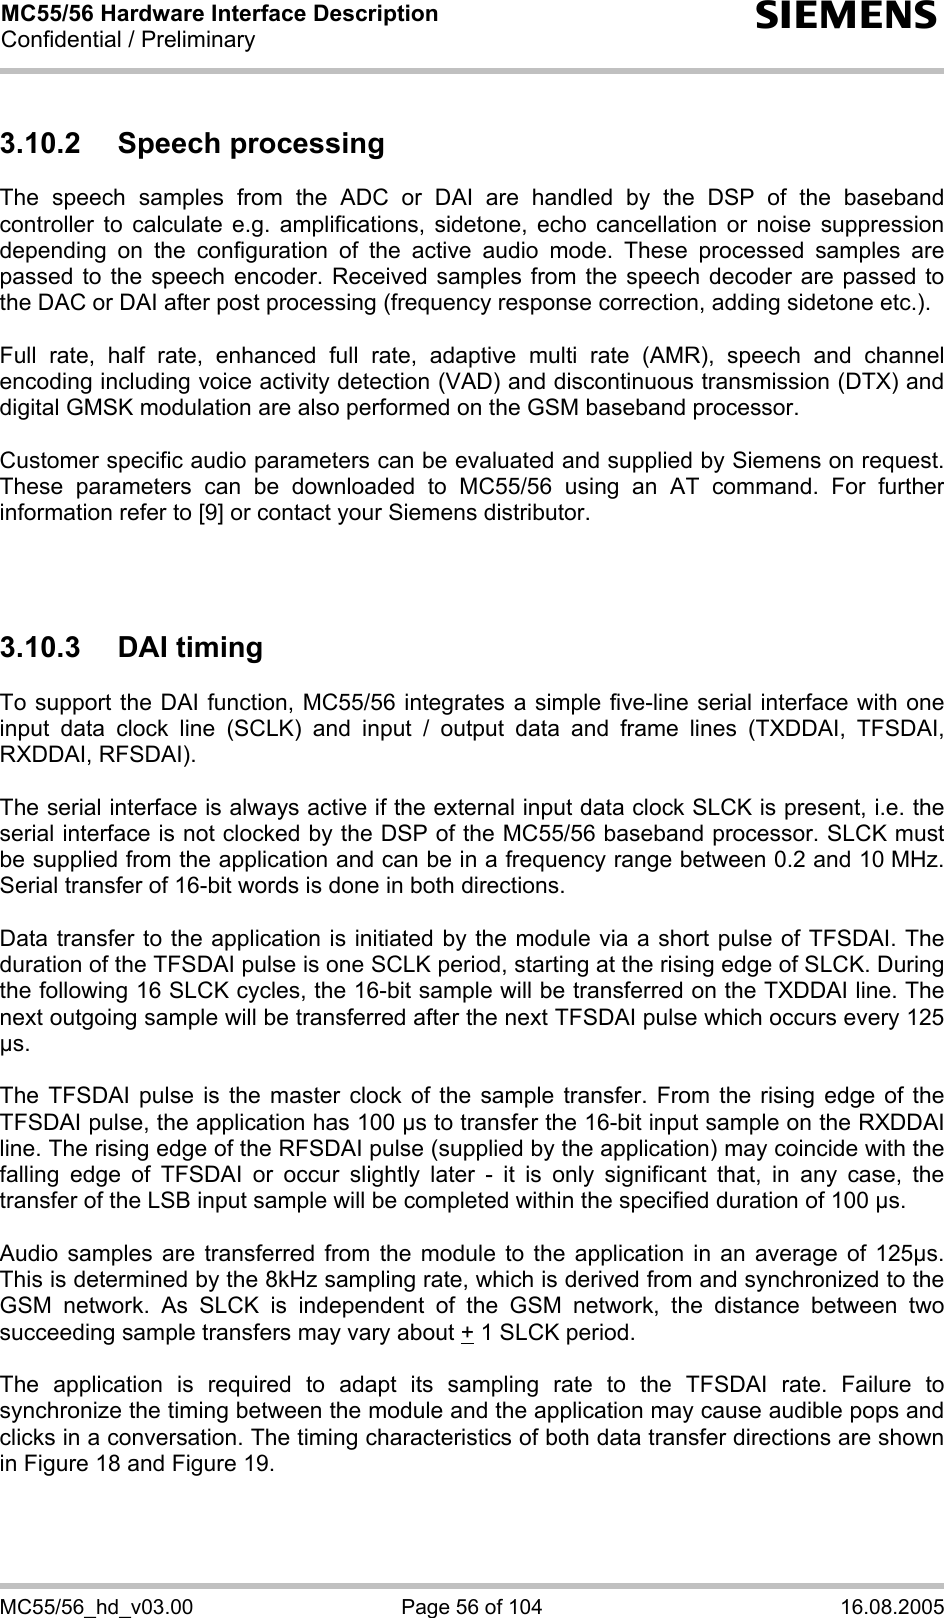 MC55/56 Hardware Interface Description Confidential / Preliminary s MC55/56_hd_v03.00  Page 56 of 104  16.08.2005 3.10.2 Speech processing The speech samples from the ADC or DAI are handled by the DSP of the baseband controller to calculate e.g. amplifications, sidetone, echo cancellation or noise suppression depending on the configuration of the active audio mode. These processed samples are passed to the speech encoder. Received samples from the speech decoder are passed to the DAC or DAI after post processing (frequency response correction, adding sidetone etc.).  Full rate, half rate, enhanced full rate, adaptive multi rate (AMR), speech and channel encoding including voice activity detection (VAD) and discontinuous transmission (DTX) and digital GMSK modulation are also performed on the GSM baseband processor.  Customer specific audio parameters can be evaluated and supplied by Siemens on request. These parameters can be downloaded to MC55/56 using an AT command. For further information refer to [9] or contact your Siemens distributor.    3.10.3 DAI timing To support the DAI function, MC55/56 integrates a simple five-line serial interface with one input data clock line (SCLK) and input / output data and frame lines (TXDDAI, TFSDAI, RXDDAI, RFSDAI).   The serial interface is always active if the external input data clock SLCK is present, i.e. the serial interface is not clocked by the DSP of the MC55/56 baseband processor. SLCK must be supplied from the application and can be in a frequency range between 0.2 and 10 MHz. Serial transfer of 16-bit words is done in both directions.   Data transfer to the application is initiated by the module via a short pulse of TFSDAI. The duration of the TFSDAI pulse is one SCLK period, starting at the rising edge of SLCK. During the following 16 SLCK cycles, the 16-bit sample will be transferred on the TXDDAI line. The next outgoing sample will be transferred after the next TFSDAI pulse which occurs every 125 µs.   The TFSDAI pulse is the master clock of the sample transfer. From the rising edge of the TFSDAI pulse, the application has 100 µs to transfer the 16-bit input sample on the RXDDAI line. The rising edge of the RFSDAI pulse (supplied by the application) may coincide with the falling edge of TFSDAI or occur slightly later - it is only significant that, in any case, the transfer of the LSB input sample will be completed within the specified duration of 100 µs.   Audio samples are transferred from the module to the application in an average of 125µs. This is determined by the 8kHz sampling rate, which is derived from and synchronized to the GSM network. As SLCK is independent of the GSM network, the distance between two succeeding sample transfers may vary about + 1 SLCK period.  The application is required to adapt its sampling rate to the TFSDAI rate. Failure to synchronize the timing between the module and the application may cause audible pops and clicks in a conversation. The timing characteristics of both data transfer directions are shown in Figure 18 and Figure 19.  